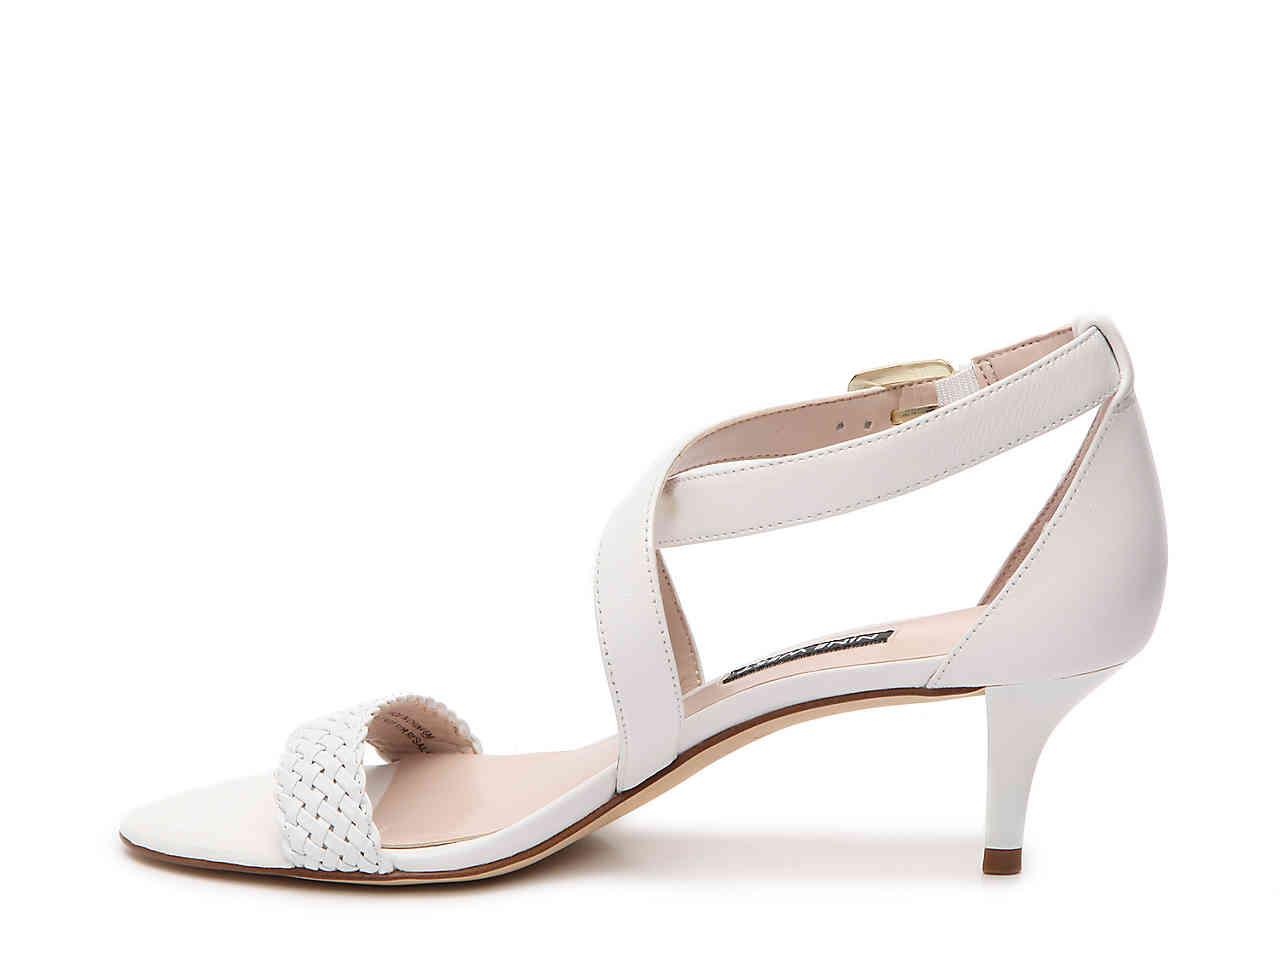 Nine West Lachlan Woven Sandal in White 